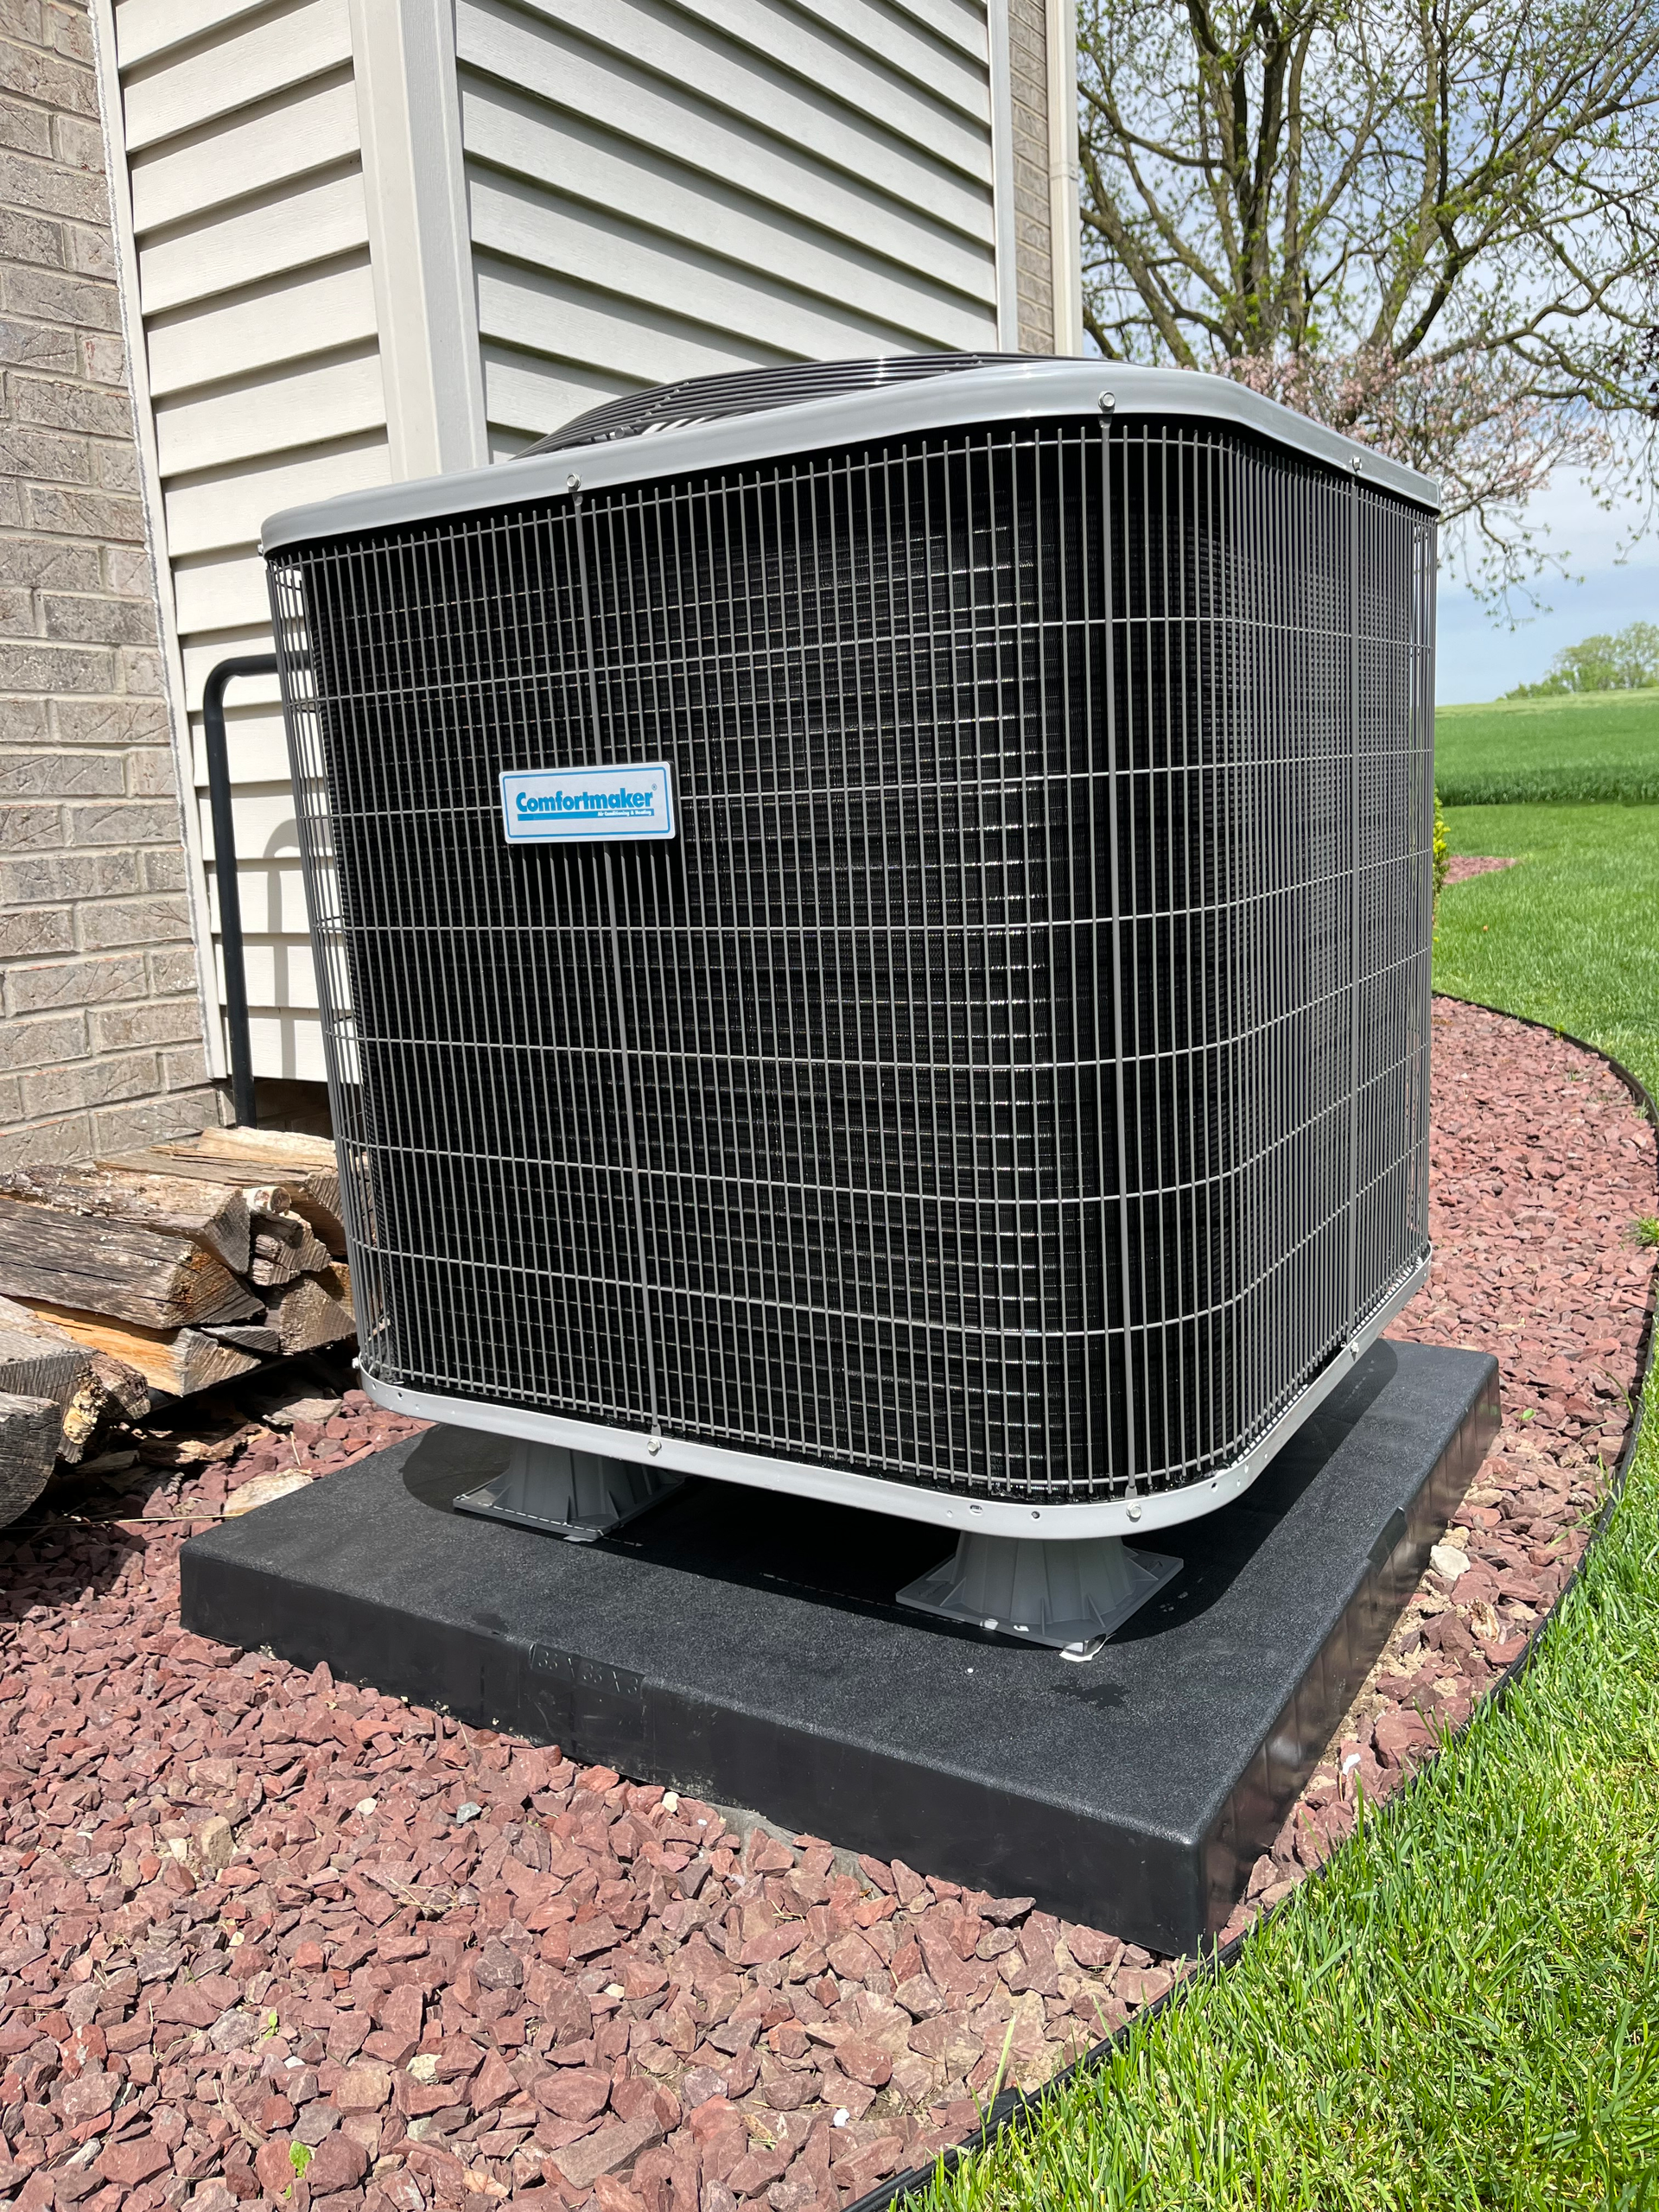 An air conditioner is sitting outside of a house on a black base.